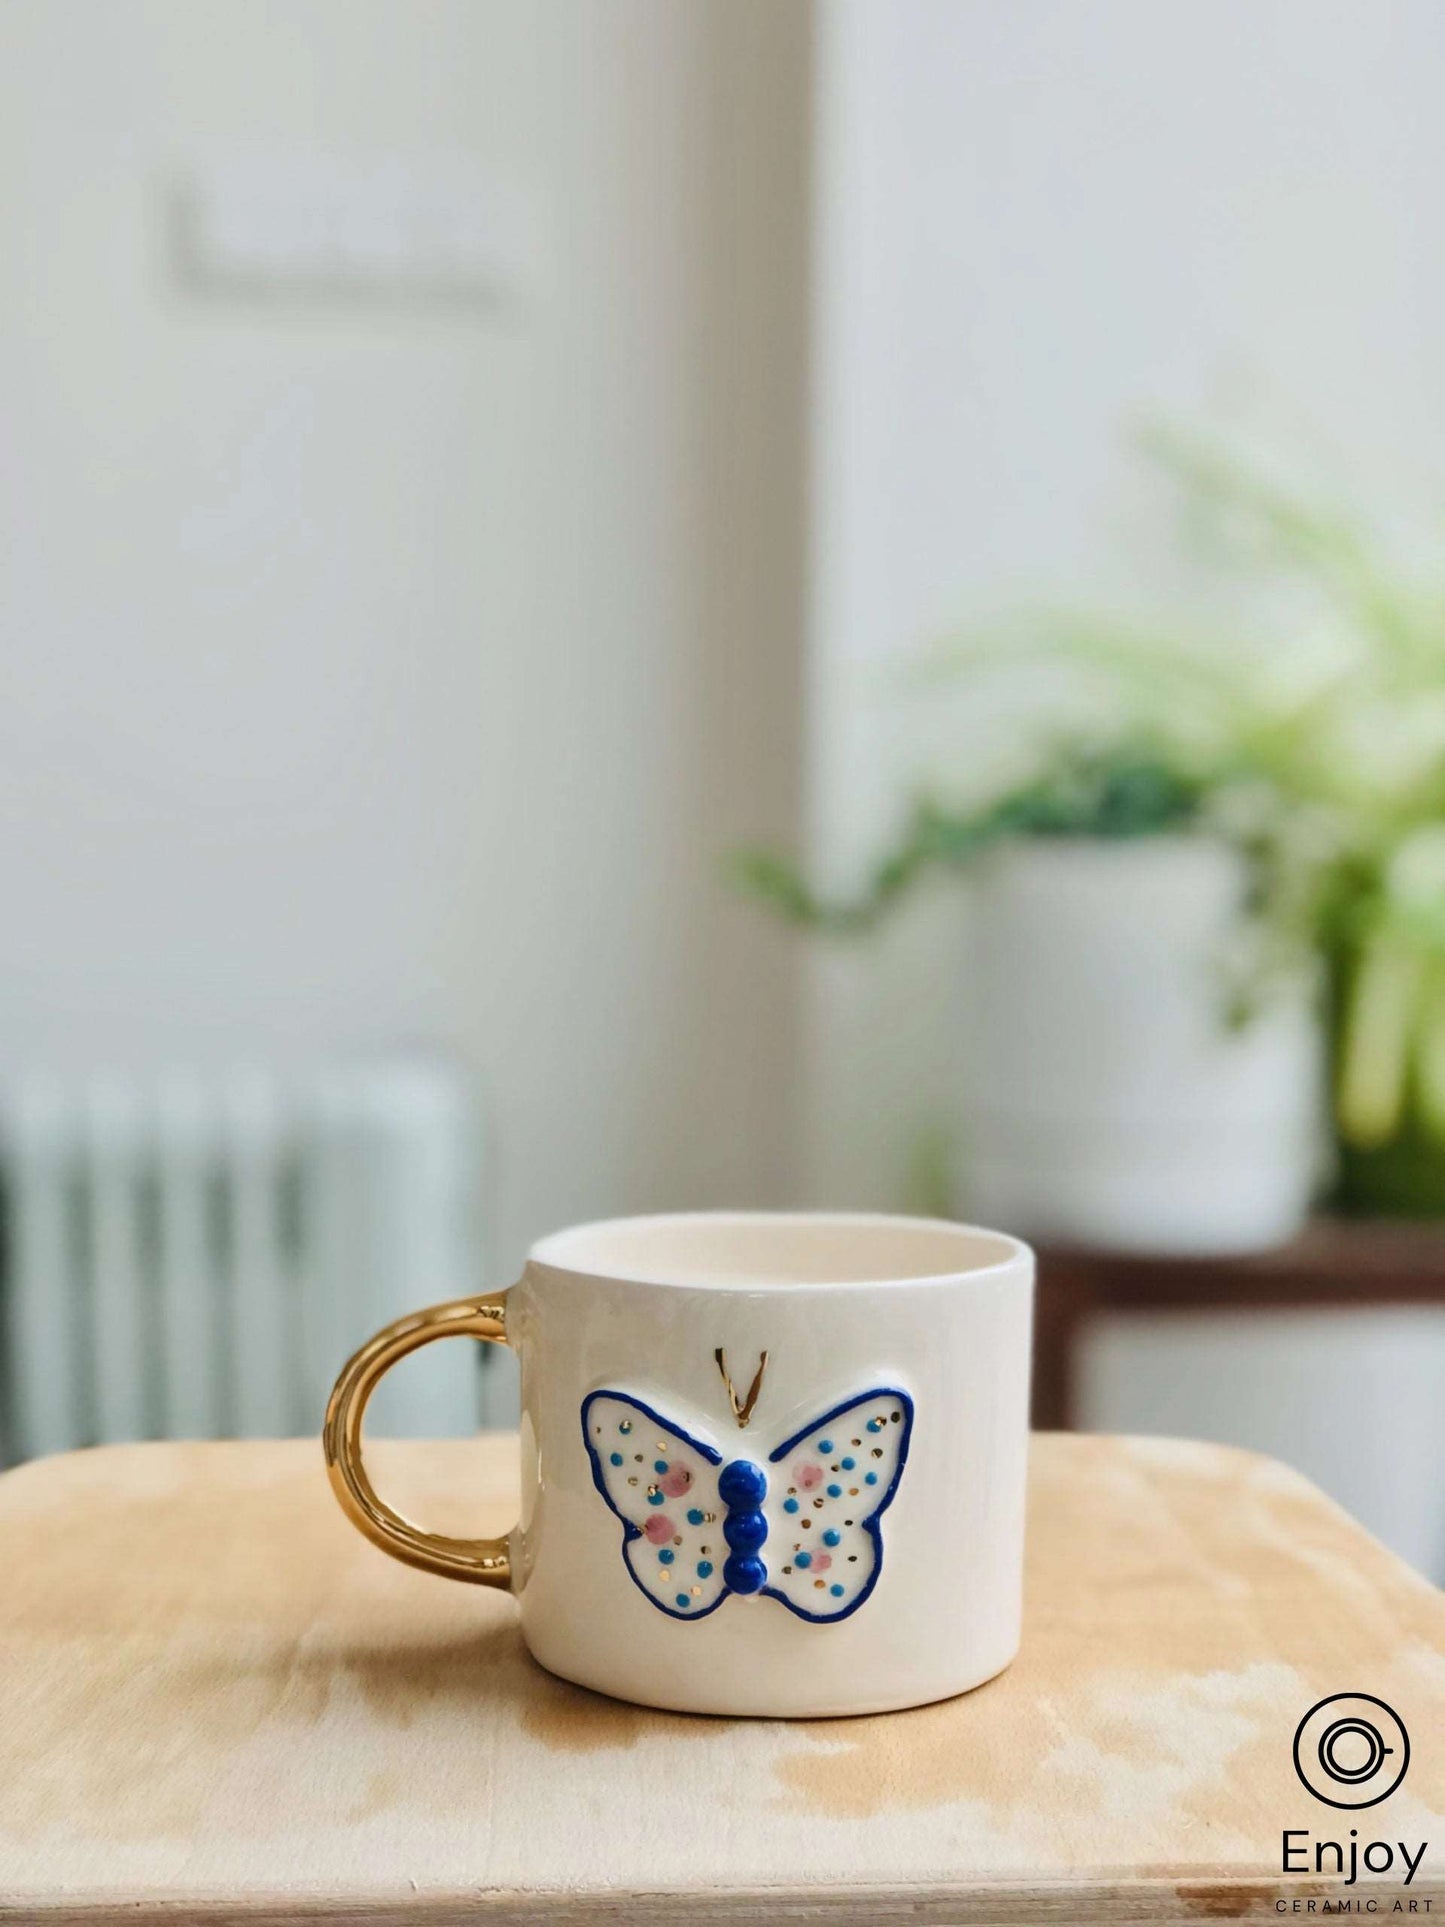 A white ceramic mug with a shiny golden handle and a hand-painted blue butterfly design, standing on a wooden table. In the soft-focus background, a green potted plant adds a touch of freshness to the tranquil setting.